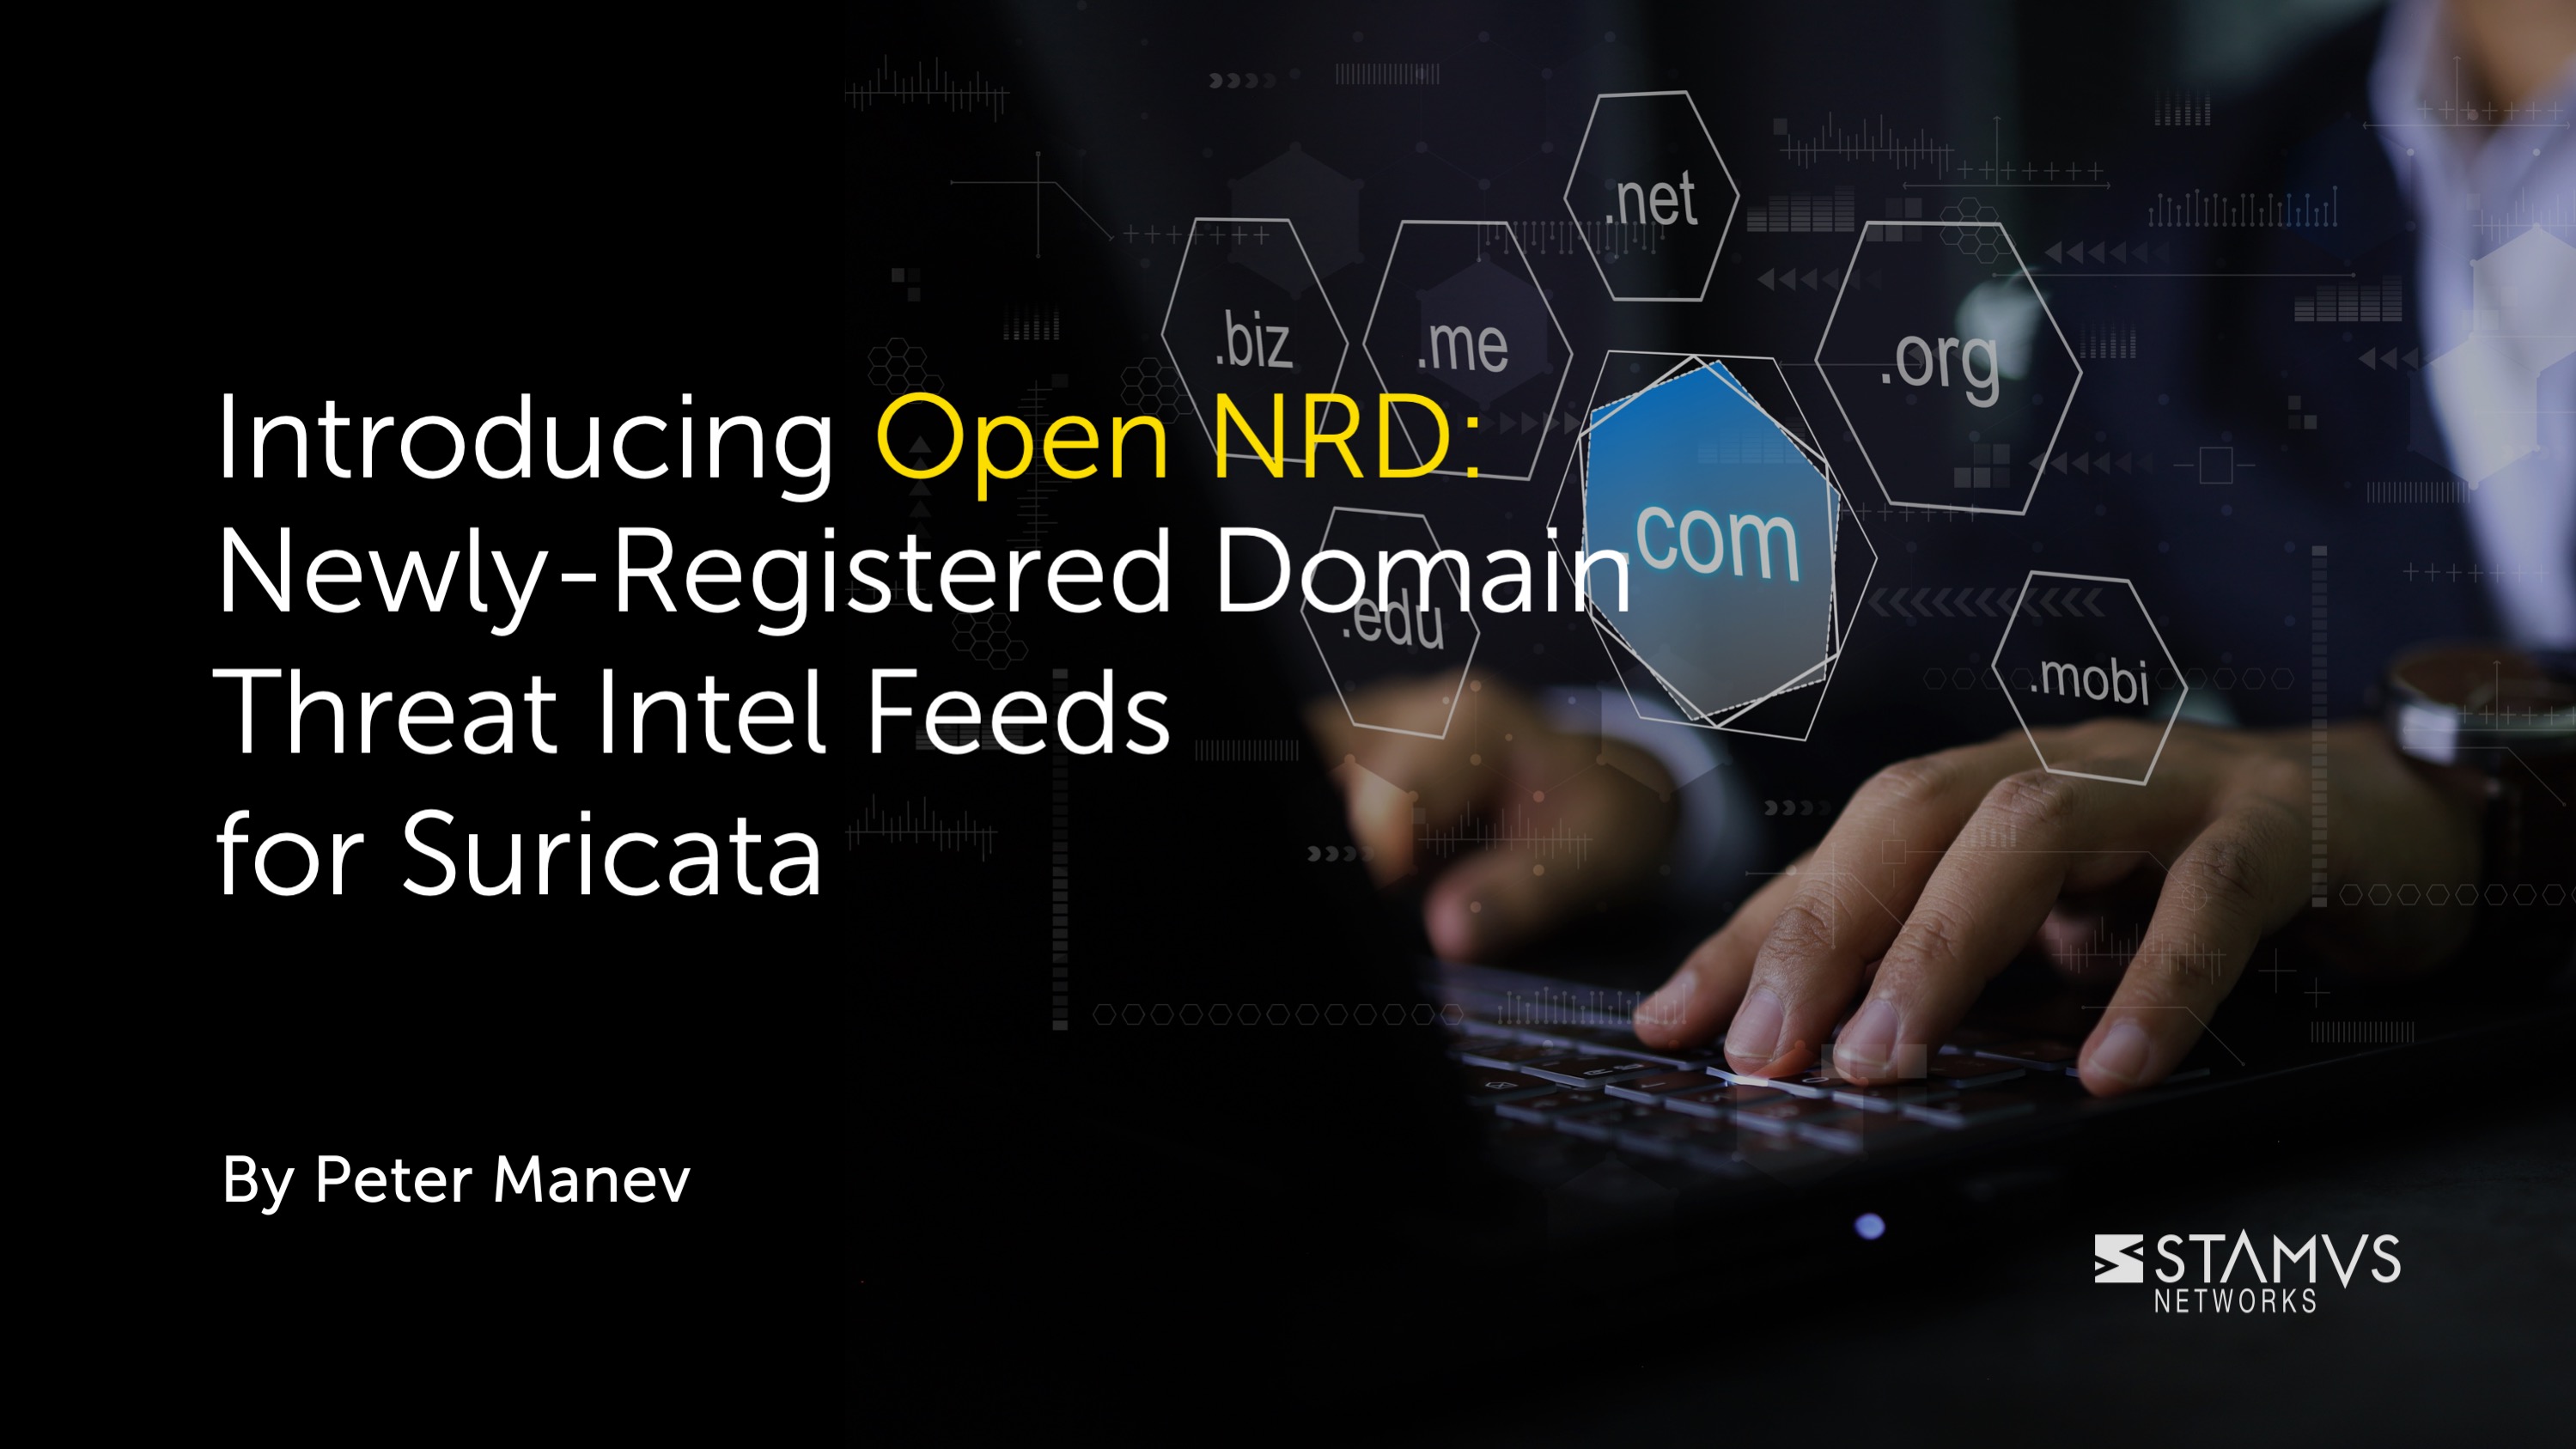 Open NRD: Newly Registered Domain Threat Intel Feeds for Suricata by Peter Manev